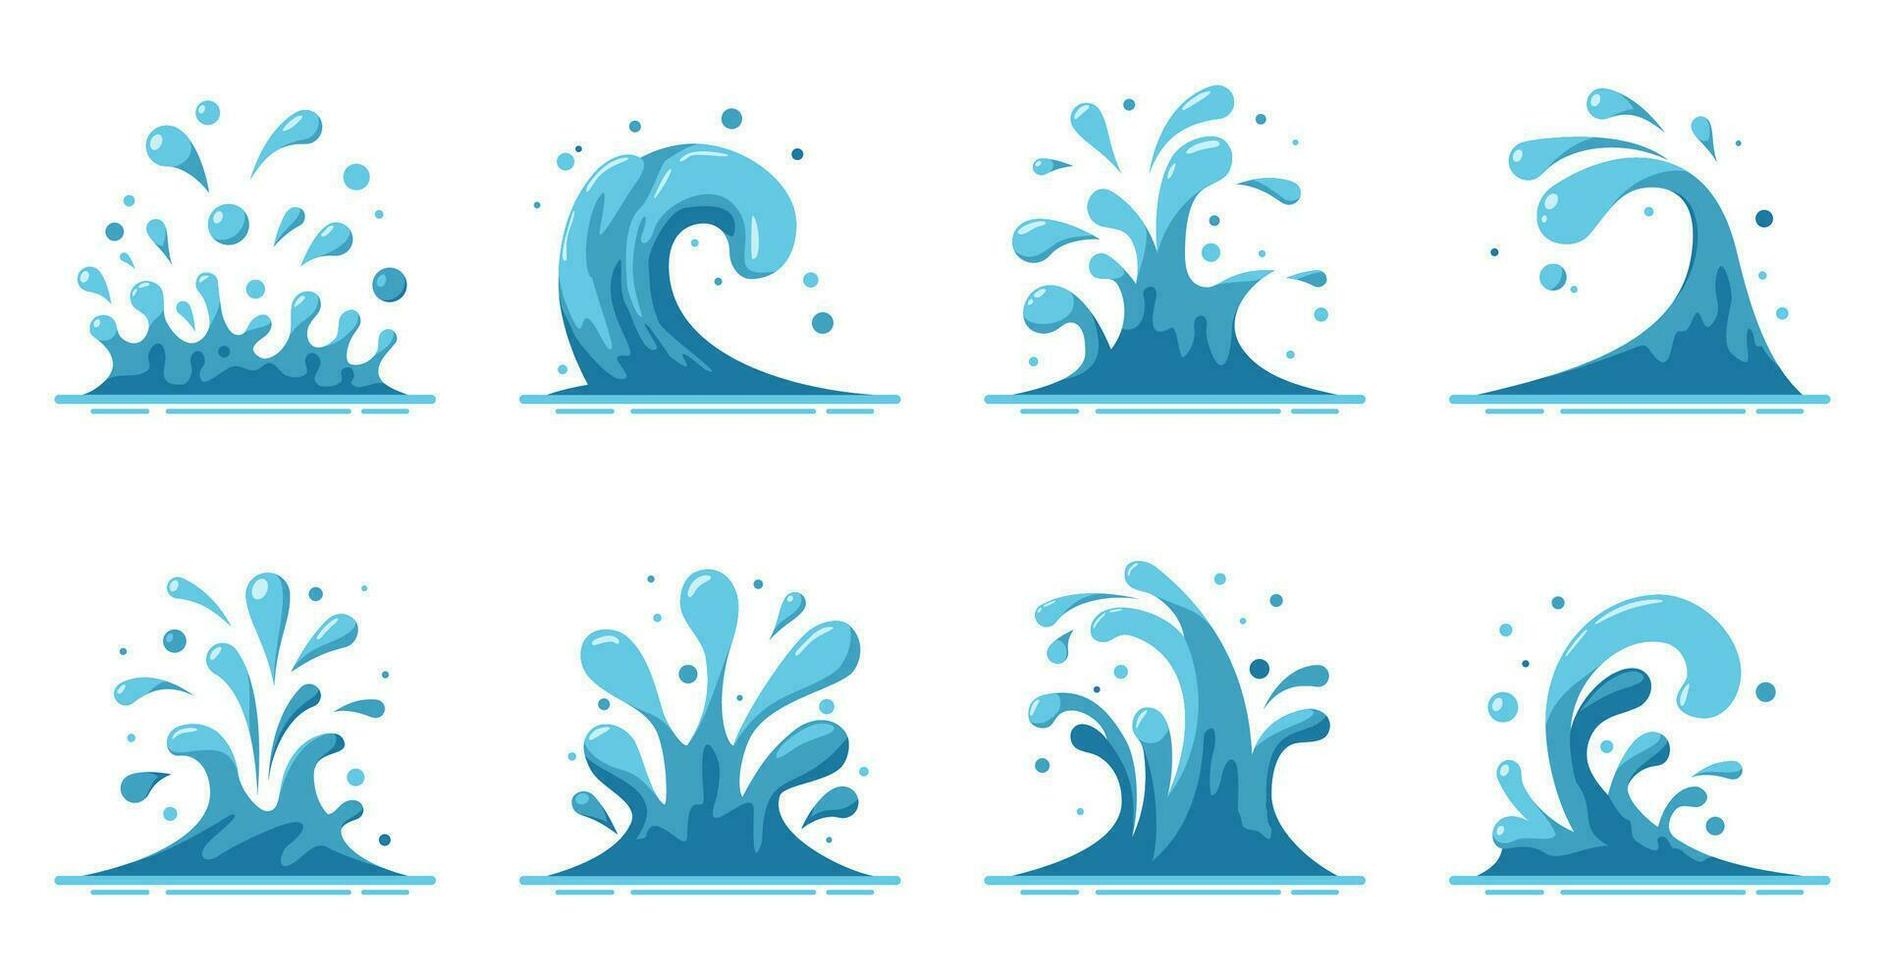 Splashes and sprinkles of water set isolated on white background. Blue water motion effects, flows, streams, spills. Falling aqua drops. Sea or ocean waves and swirl. Vector illustration.